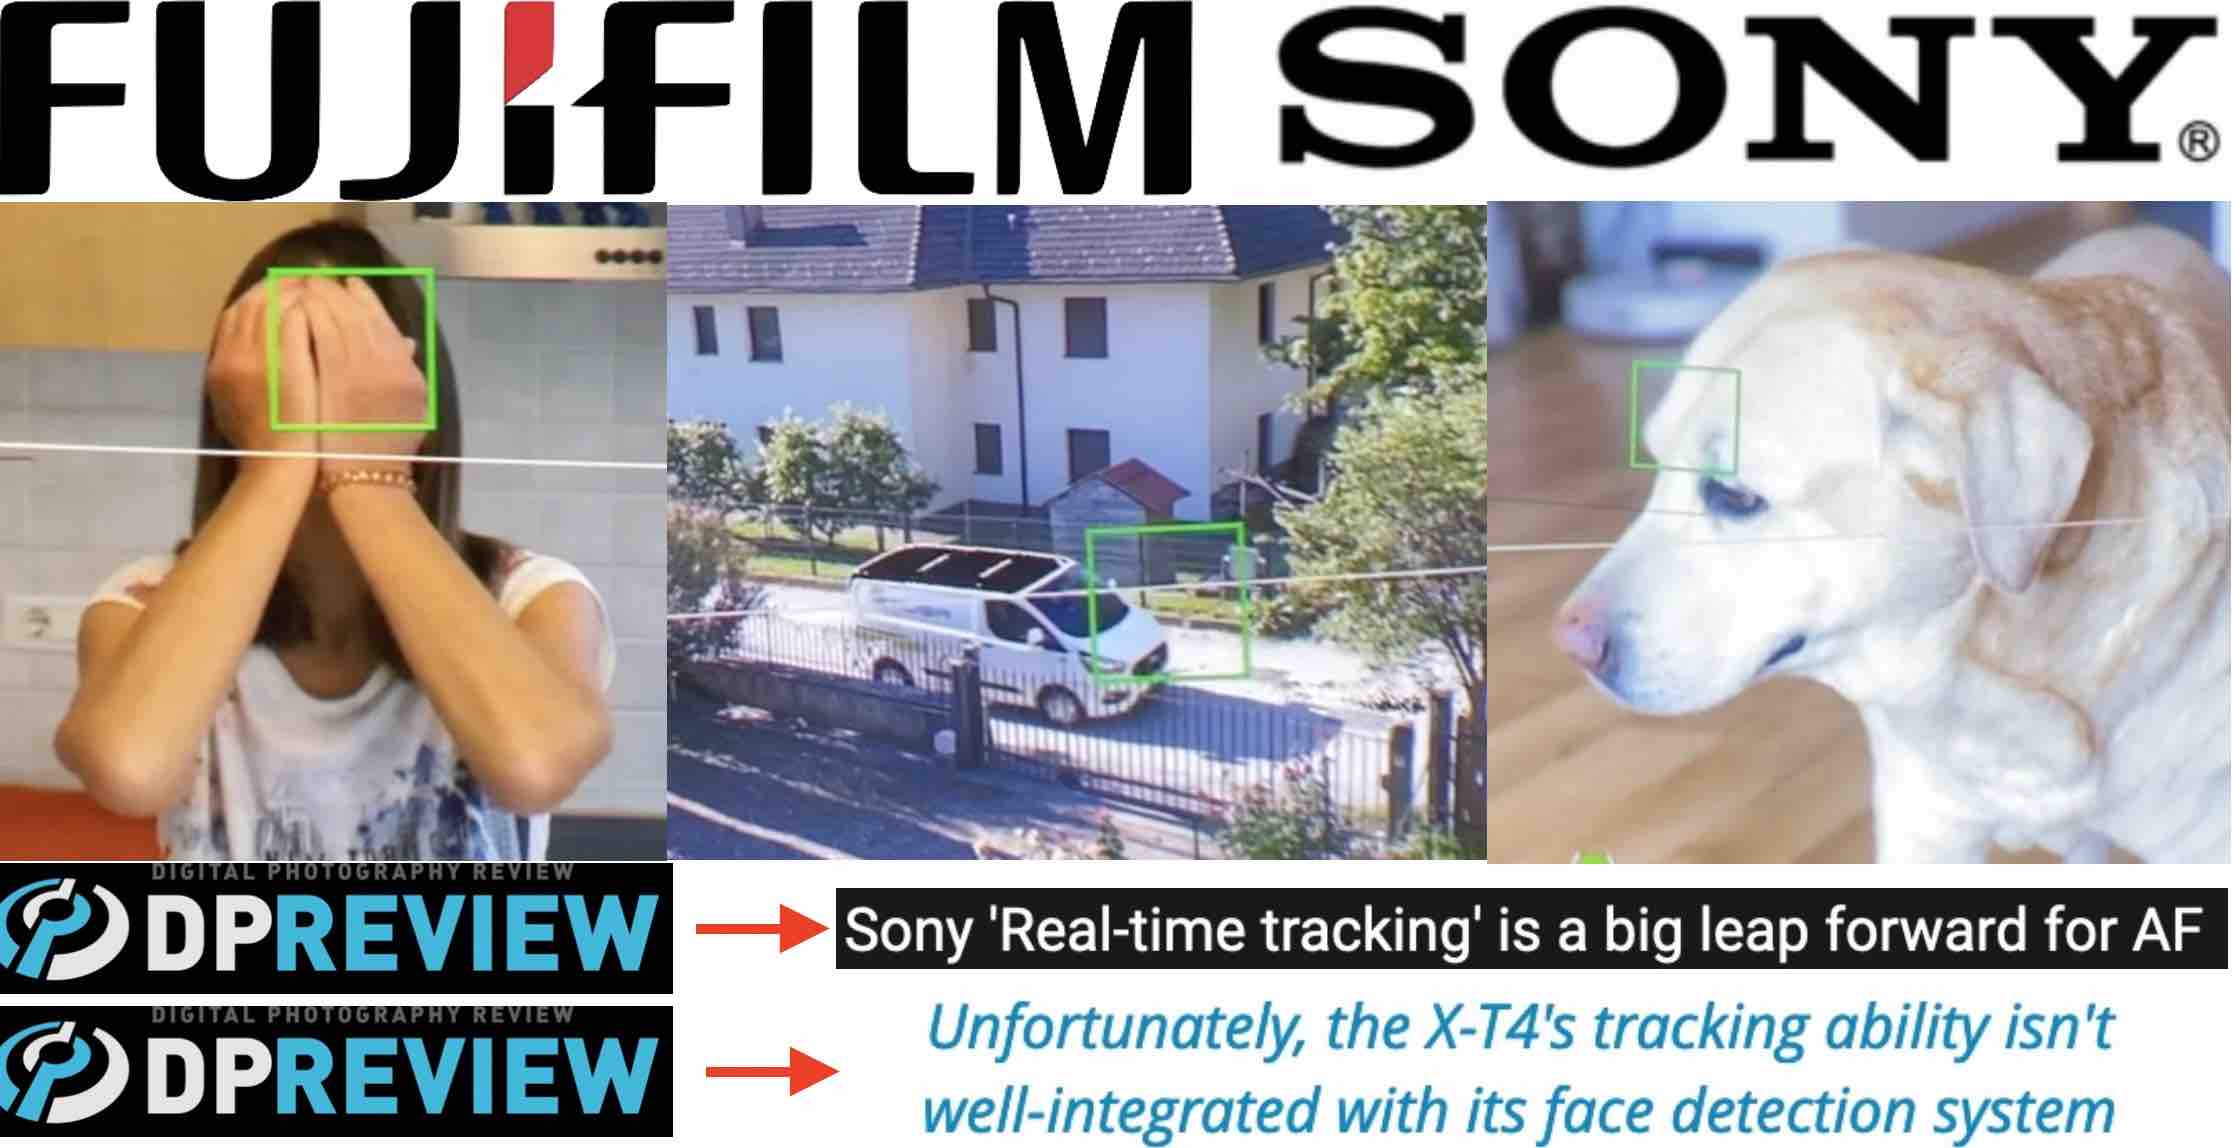 I Don't Get it: FUJIFILM X-T4 gets Highly Praised SONY 'Real-Time Tracking  Feature, but (unlike with Sony) Nobody Talks About it - VIDEO - Fuji Rumors